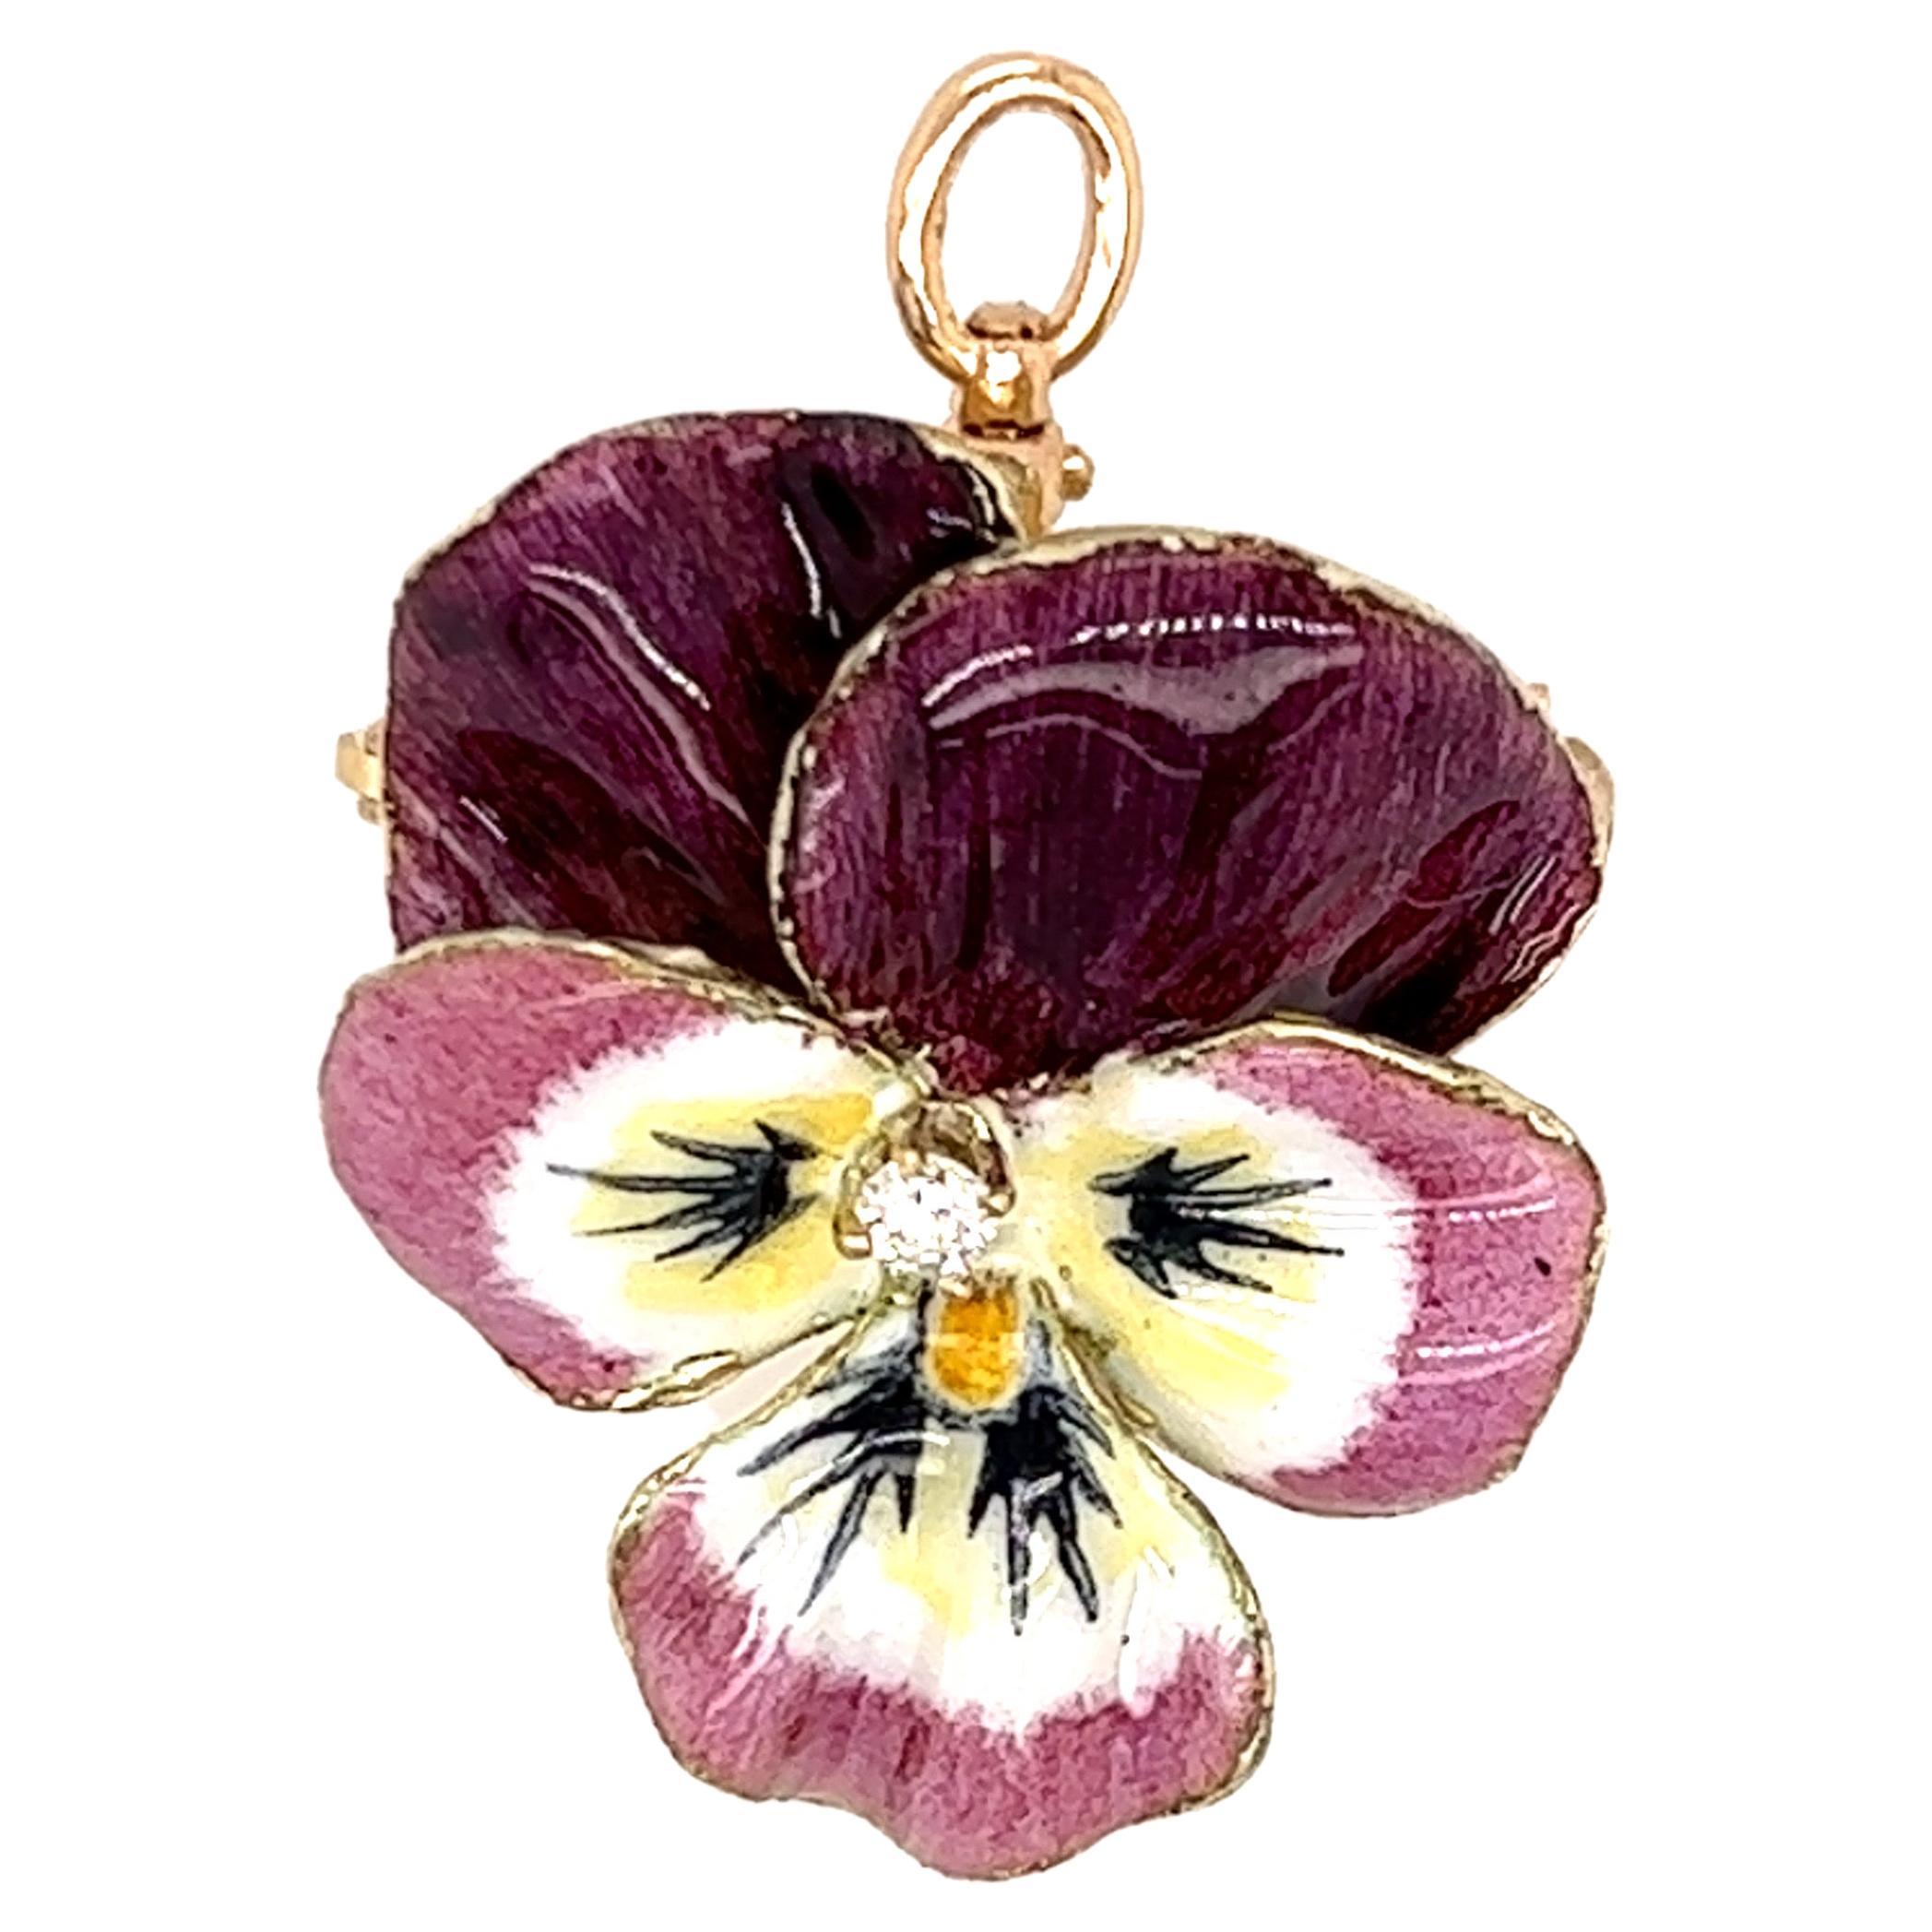 One 14-karat yellow gold pansy design convertible pendant/brooch with purple and white enamel set with one round brilliant cut diamond, approximately 0.30-carat total weight with I/J color and SI1 clarity.  The pendant measures one inch and is